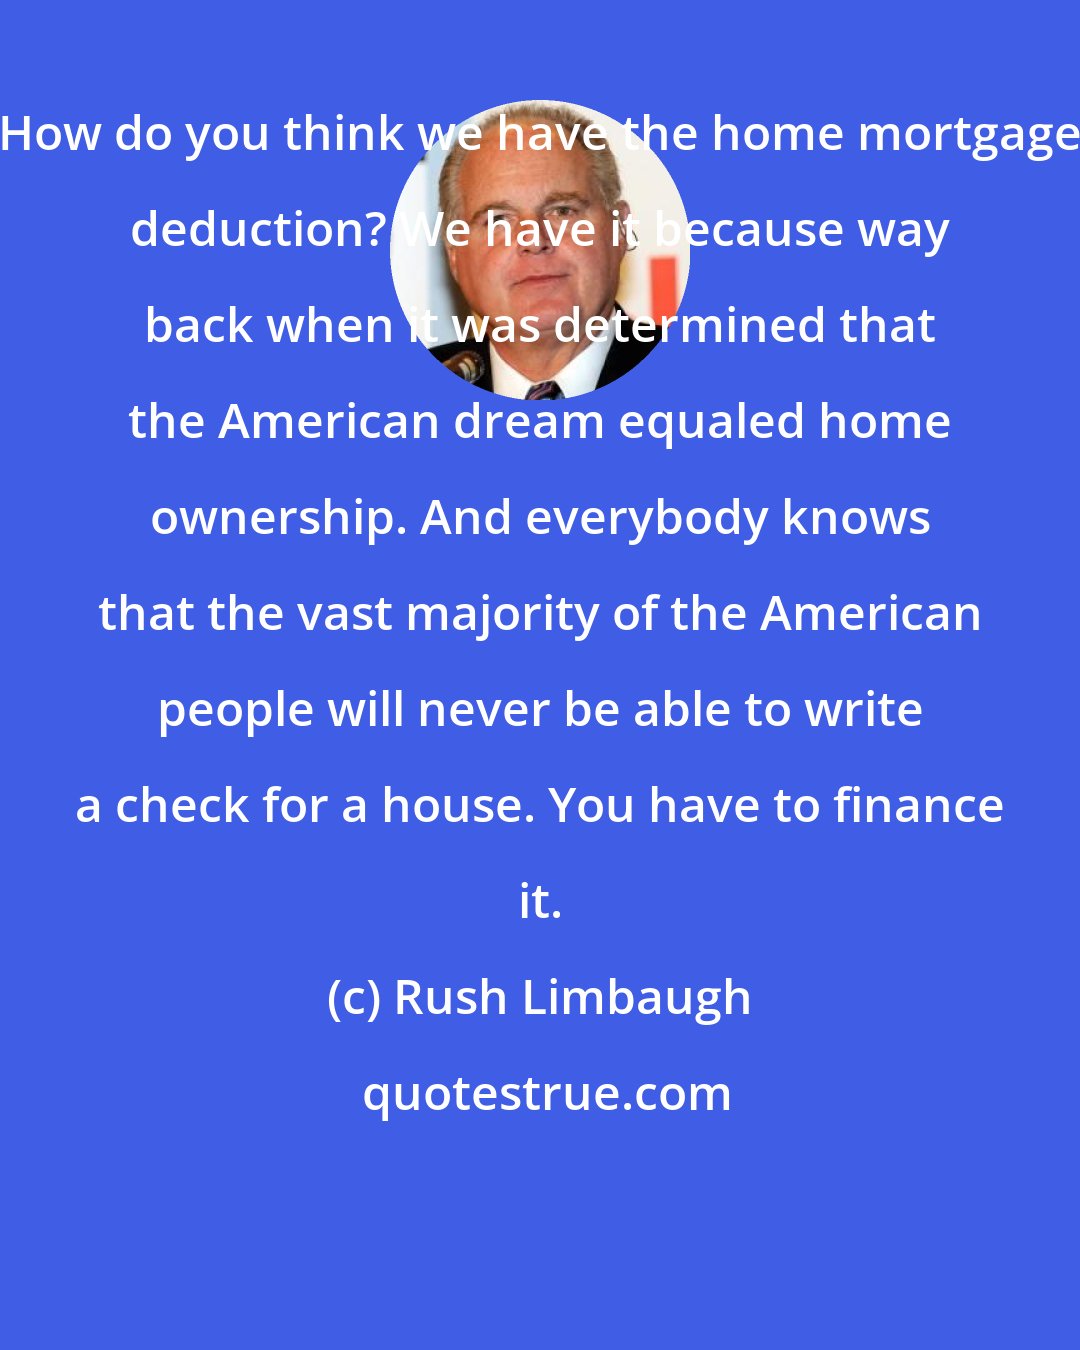 Rush Limbaugh: How do you think we have the home mortgage deduction? We have it because way back when it was determined that the American dream equaled home ownership. And everybody knows that the vast majority of the American people will never be able to write a check for a house. You have to finance it.